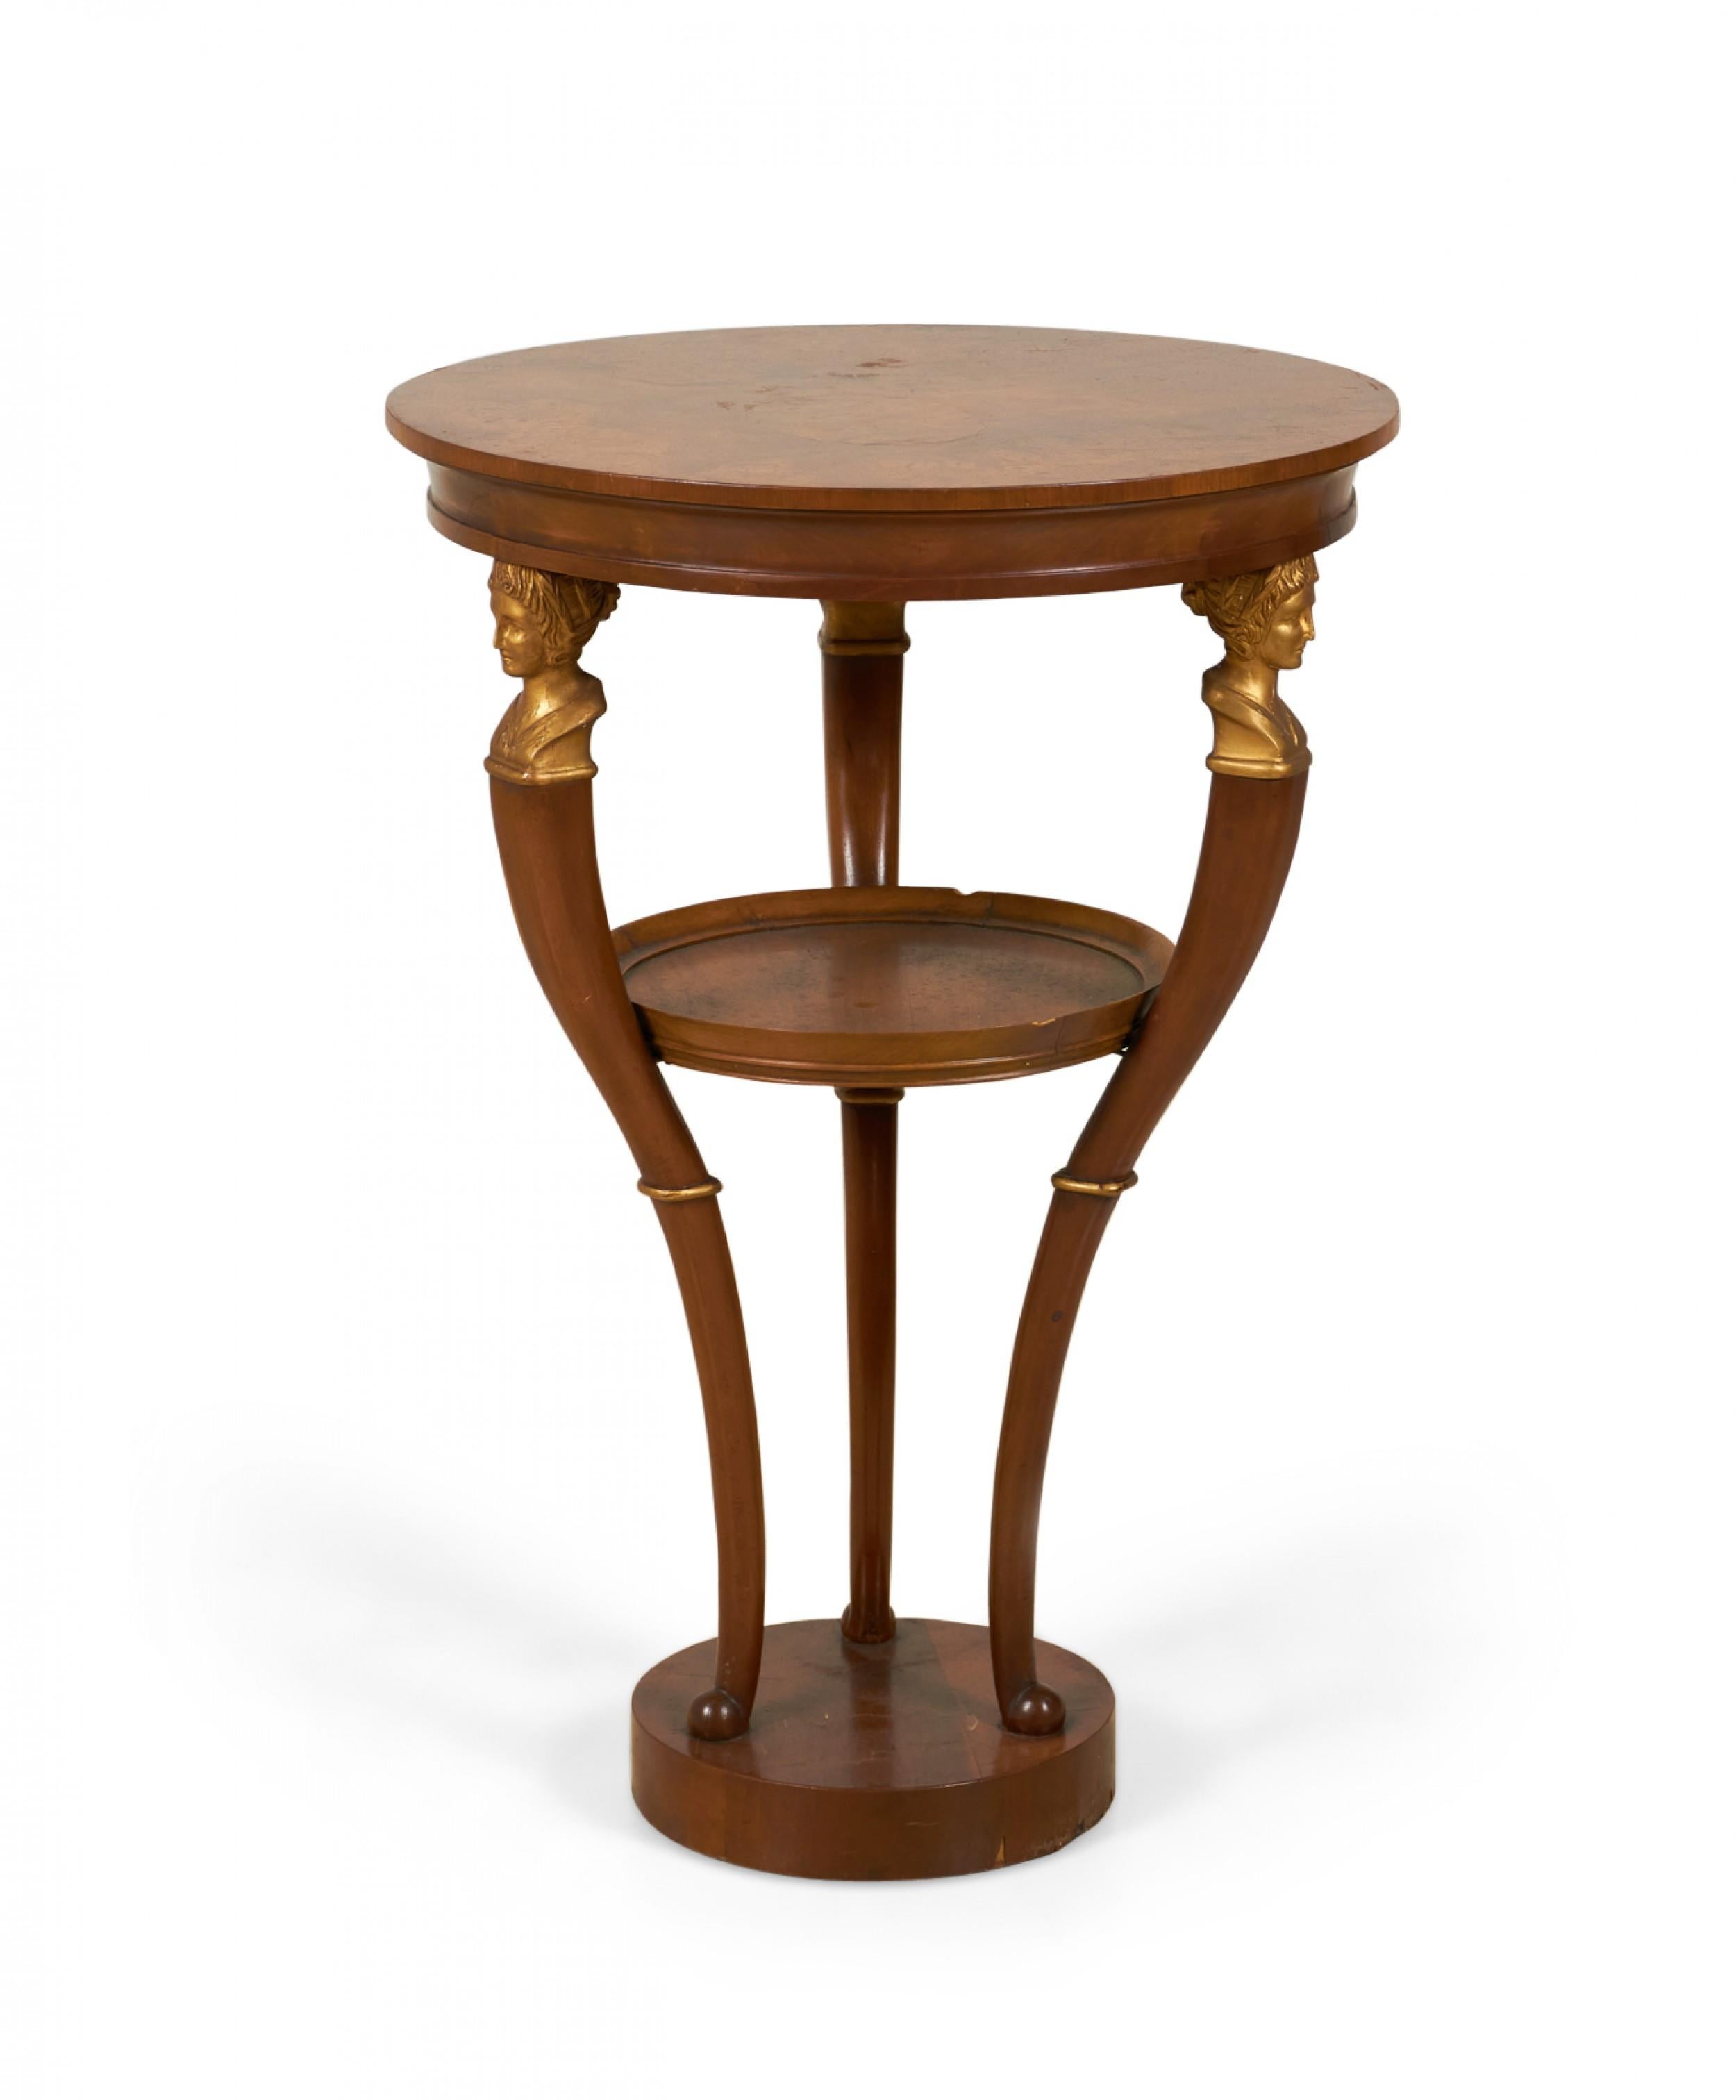 PAIR of Mid-Century Neoclassical-style mahogany end / side tables with circular tops and a stretcher shelves supported by three curved legs topped with brass embellishment busts atop a circular base. (BAKER FURNITURE COMPANY)(PRICED AS PAIR)
